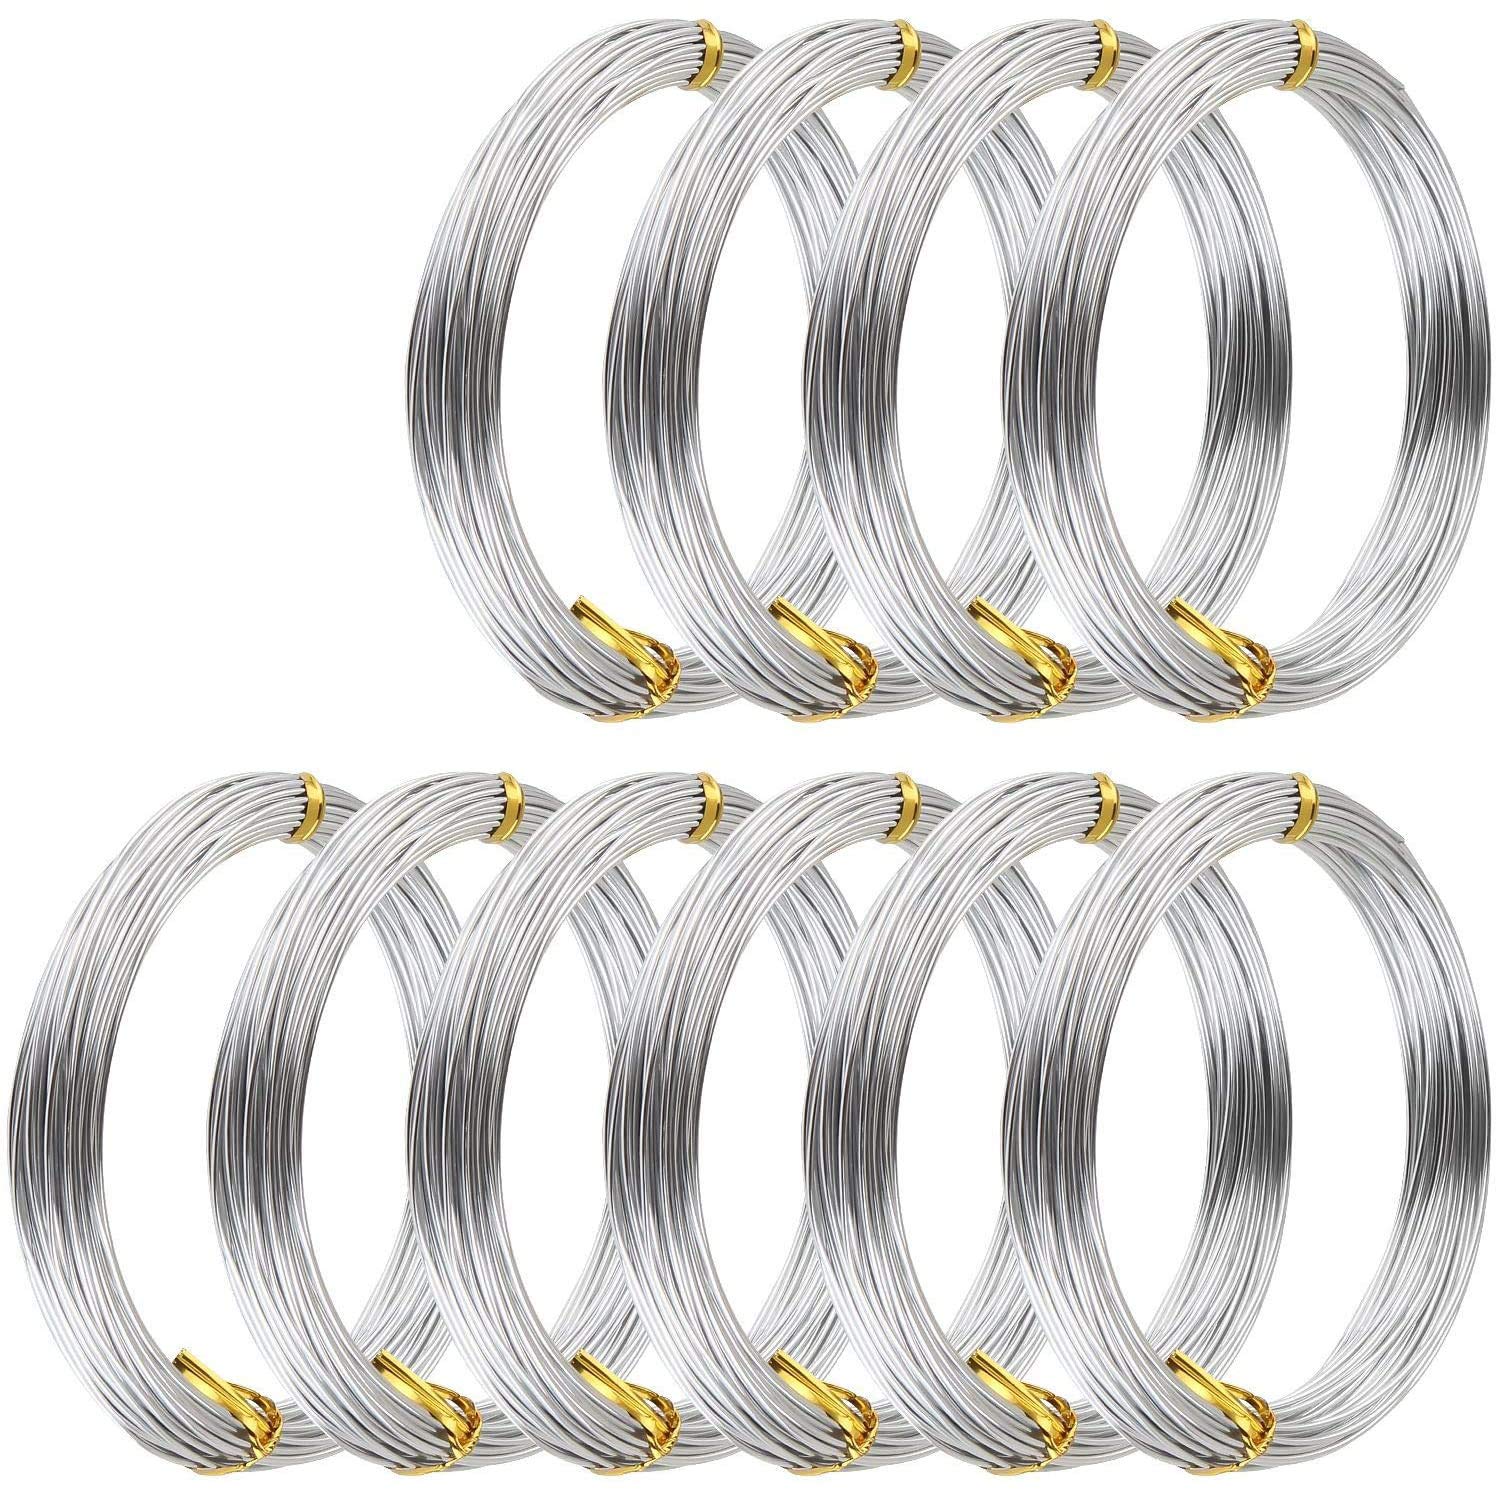 1m DIY Silver Alloy Wire Crafts Braided Metal Material Diameter Tools  0.4-1.6mm